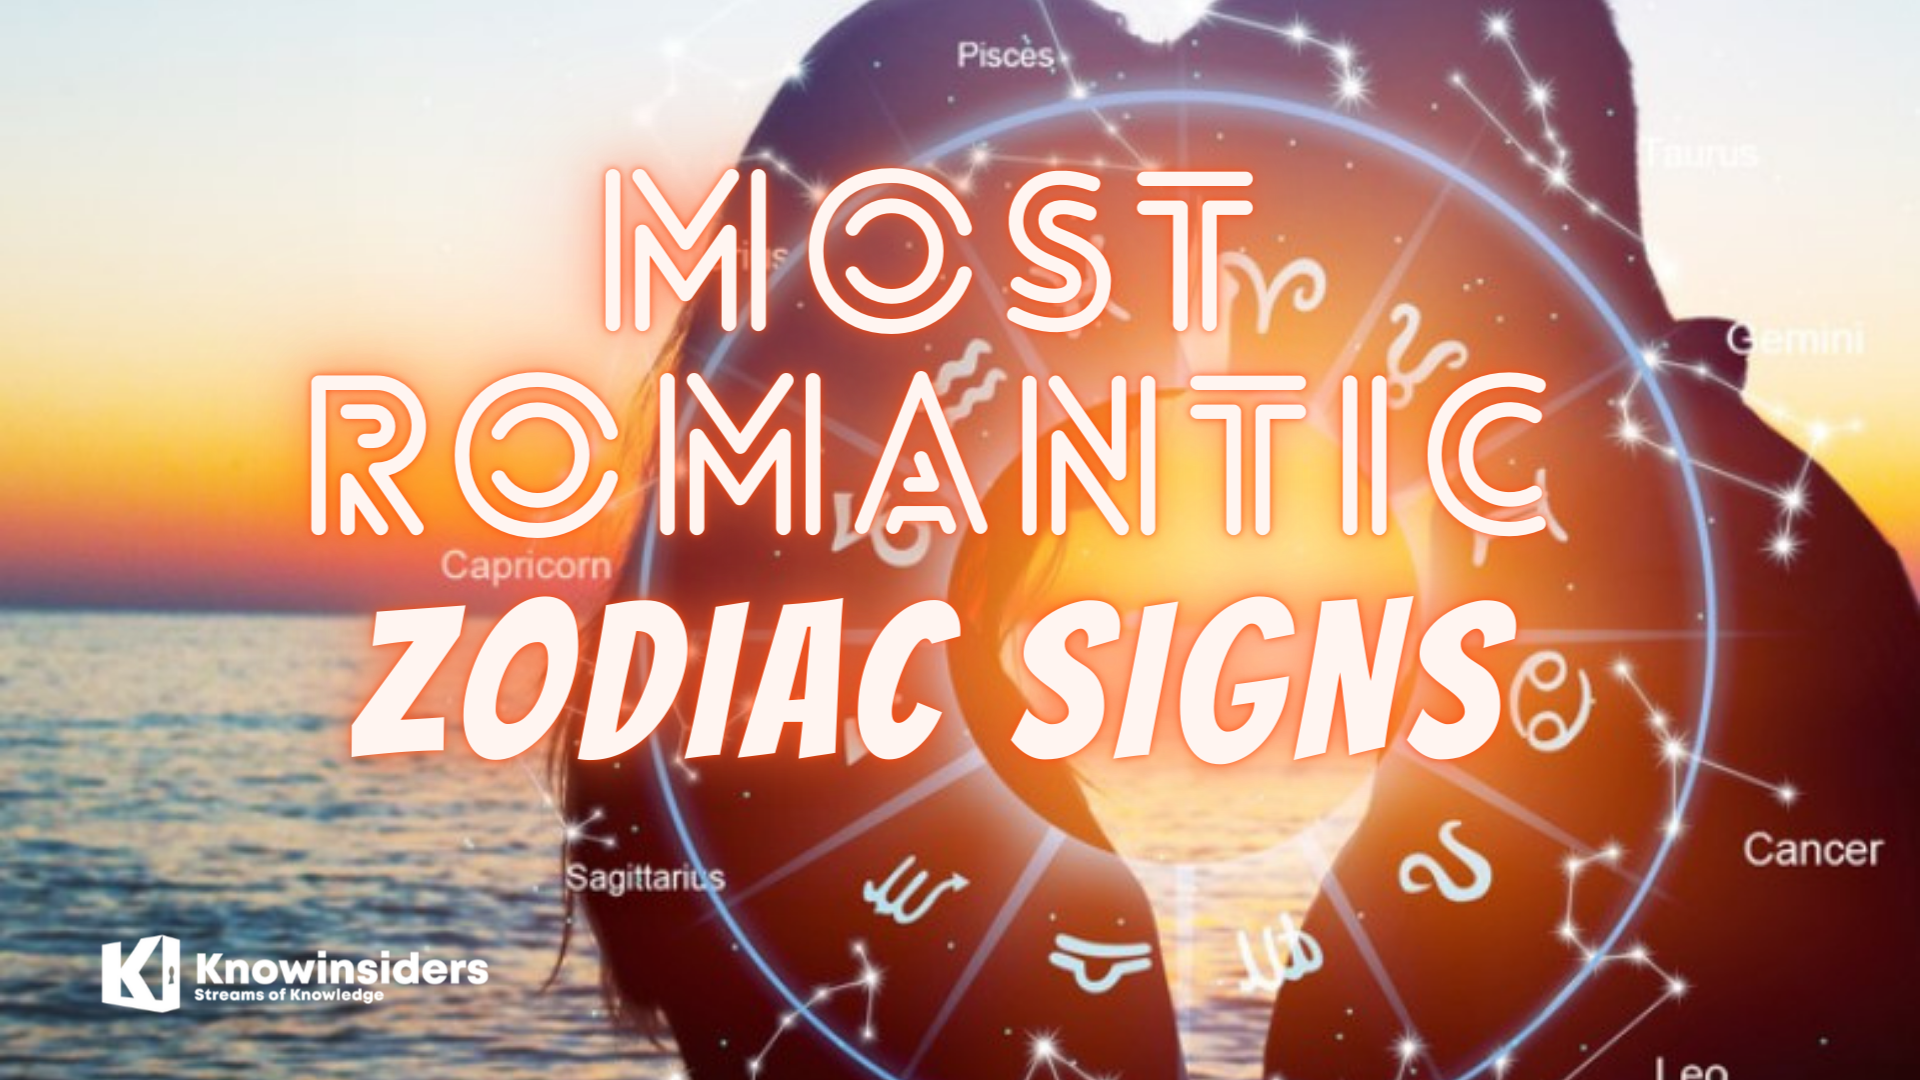 Top 5 Most Romantic Zodiac Signs According To Astrology